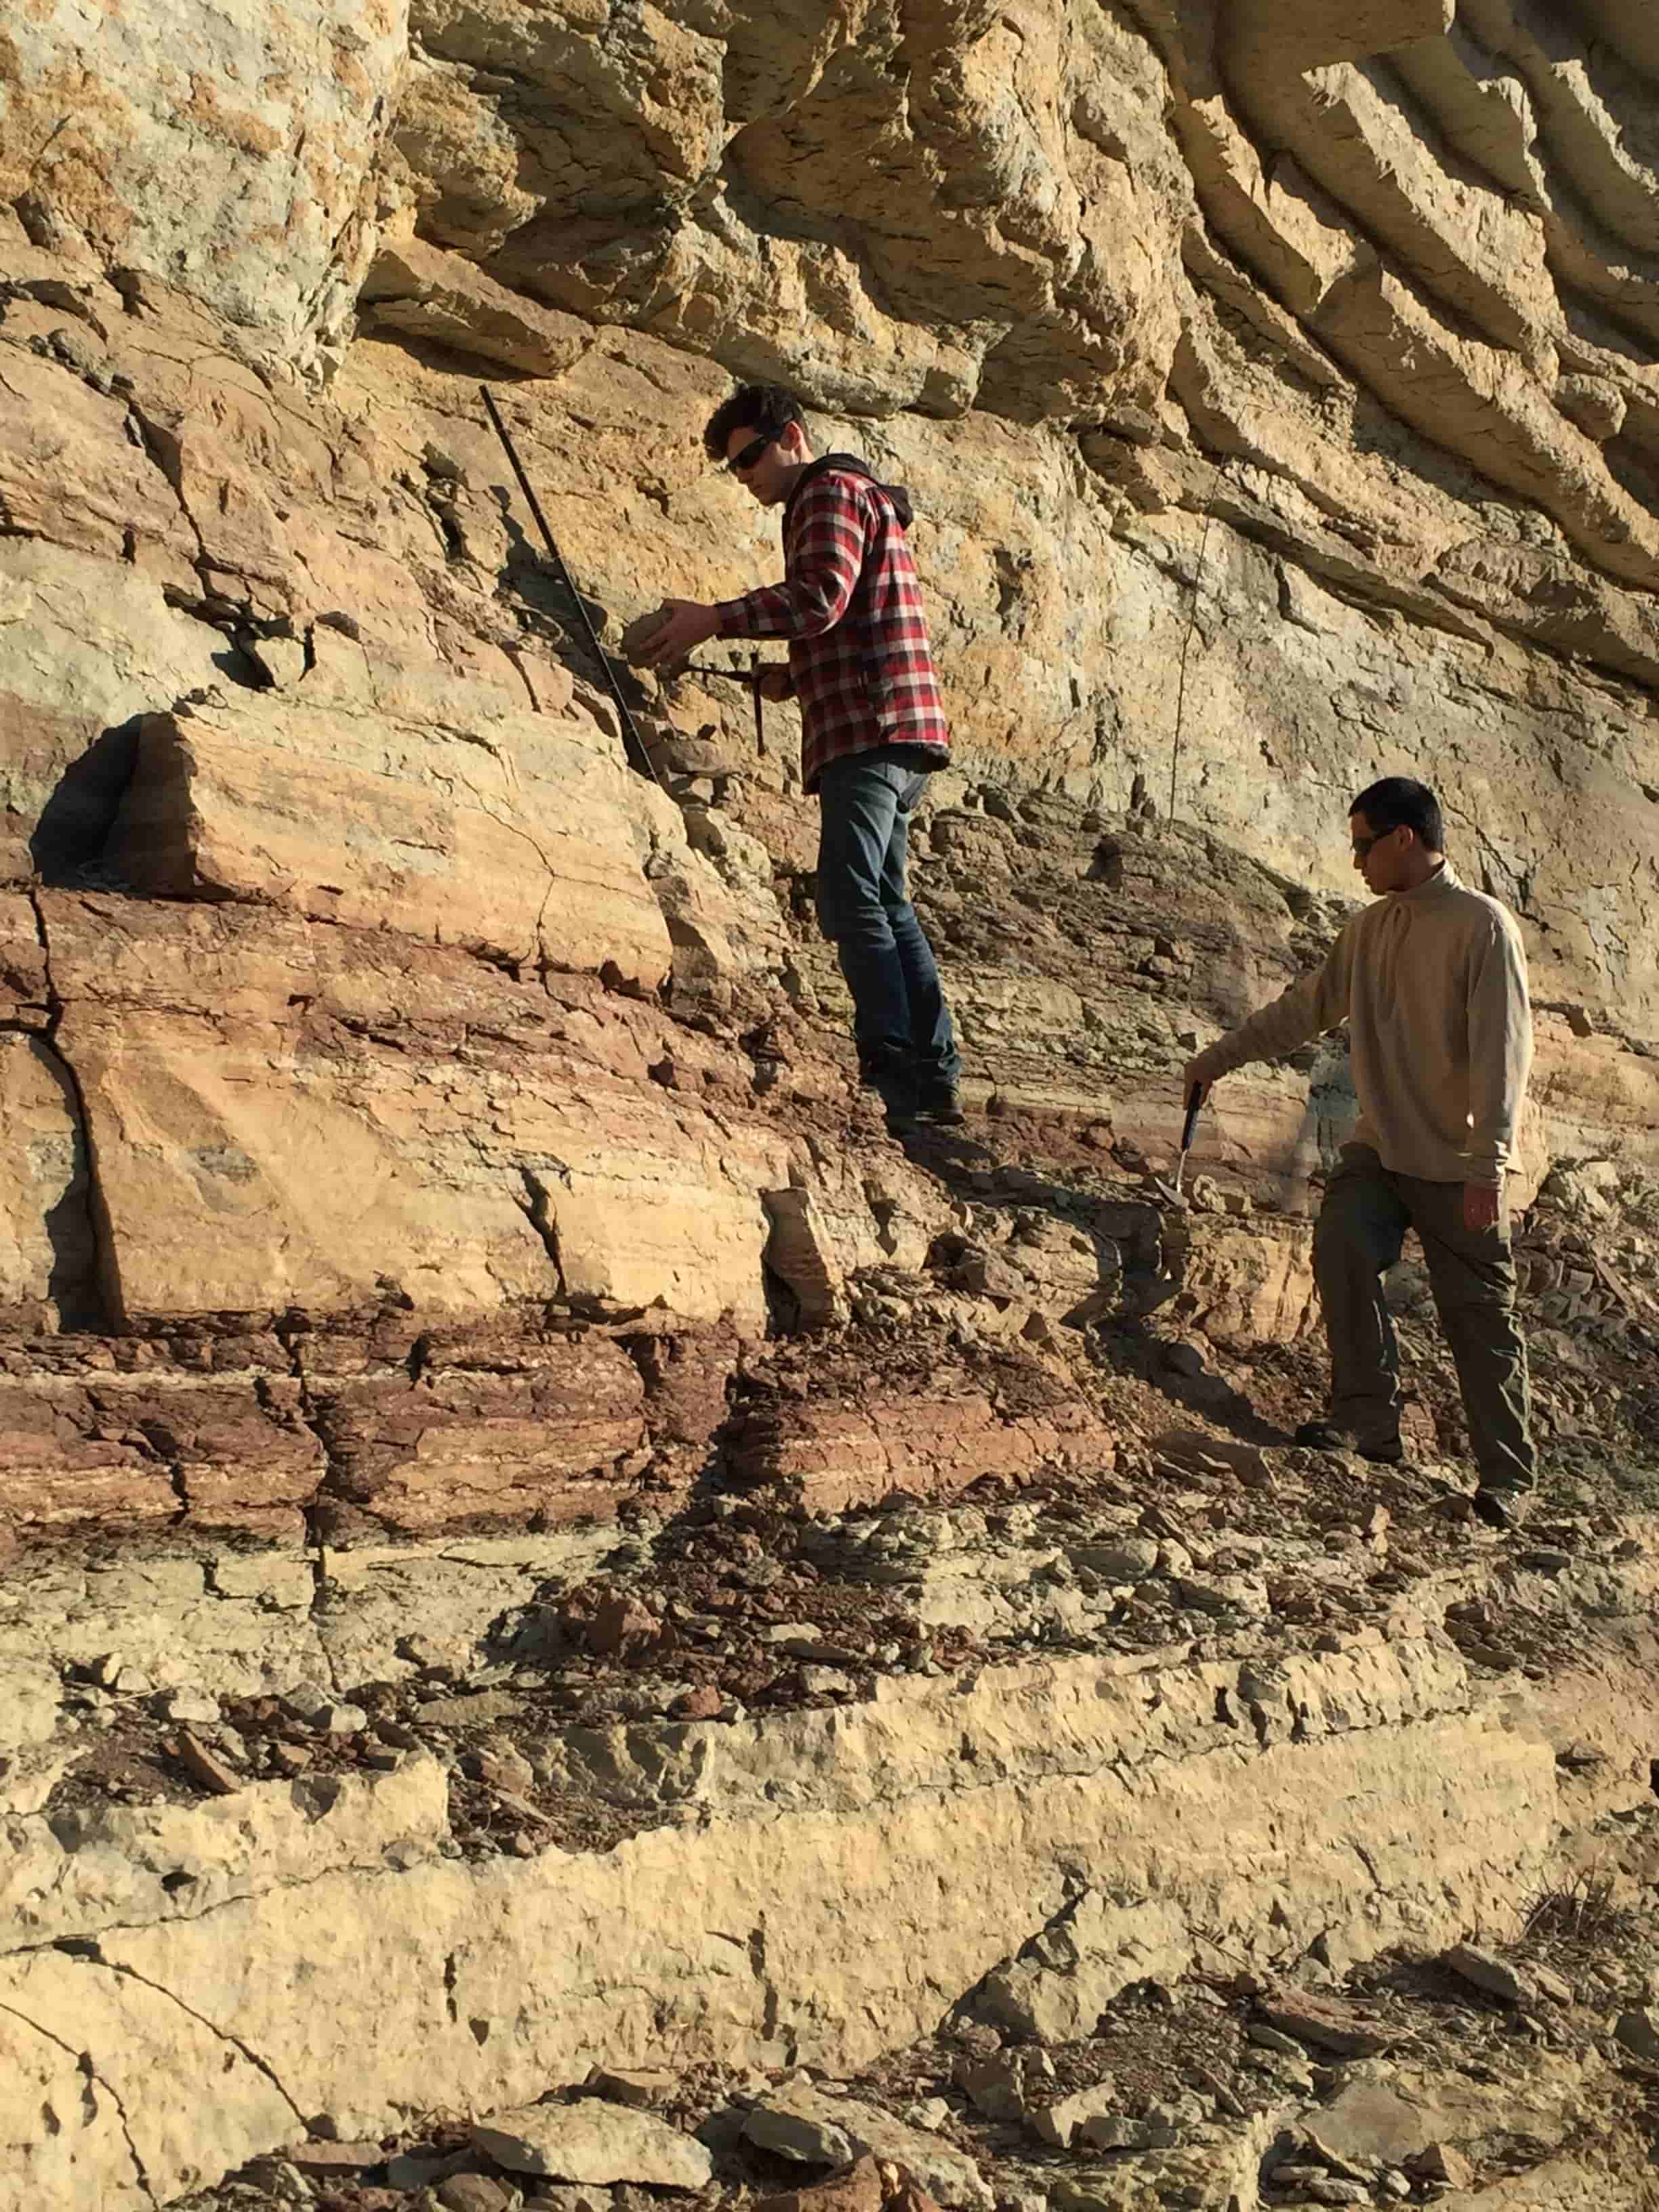 Young's team collecting samples from a site of ancient oceans west of Nashville, Tennessee. Former FSU master's student Andrew Kleinberg is pictured in the plaid shirt.